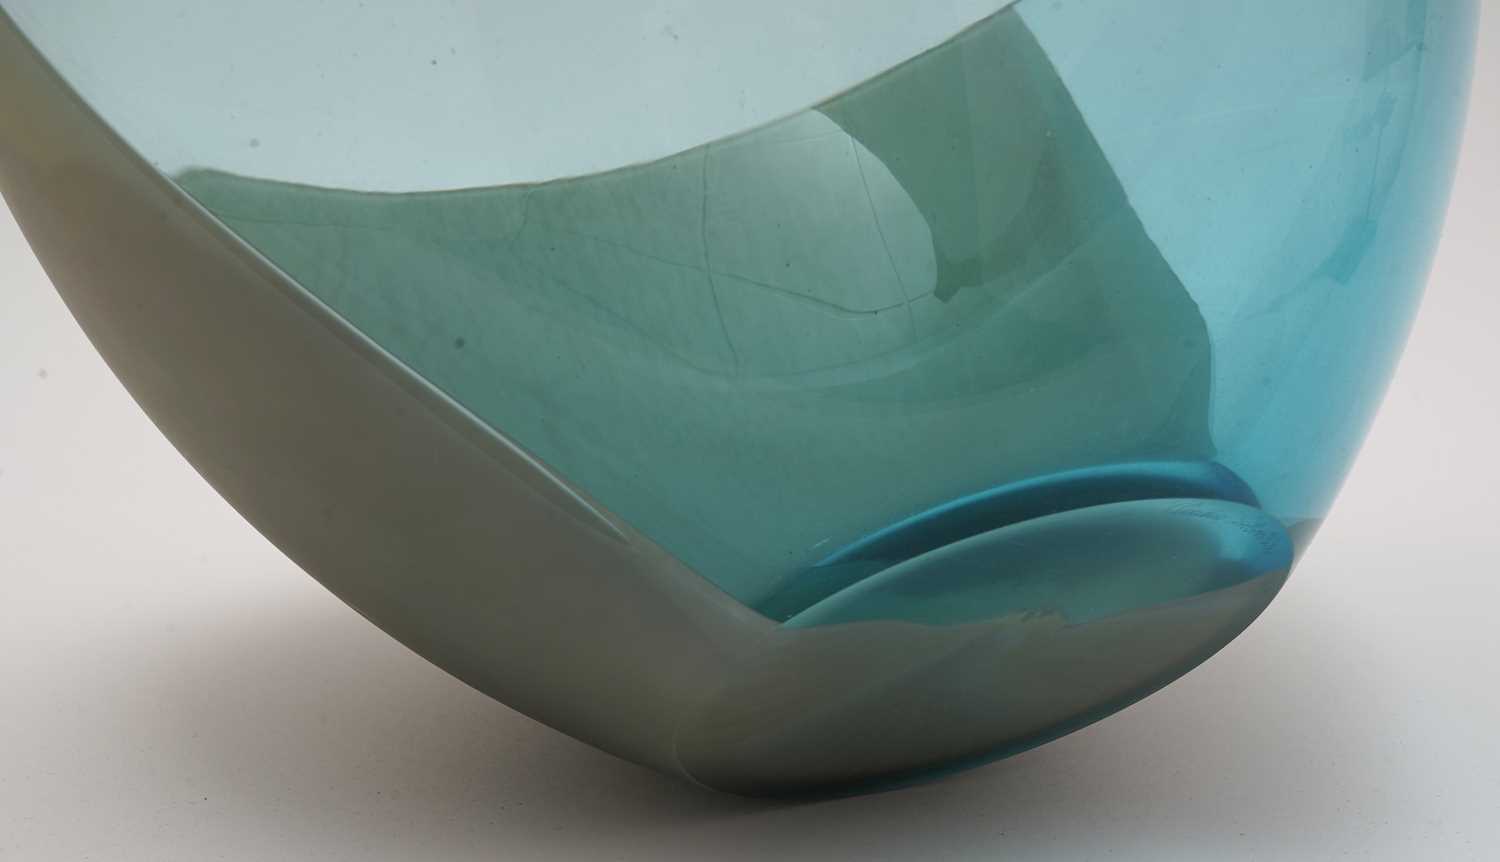 Venini 'Le Sabbie' overlay glass bowl by Claudio Silvestrin - Image 4 of 7